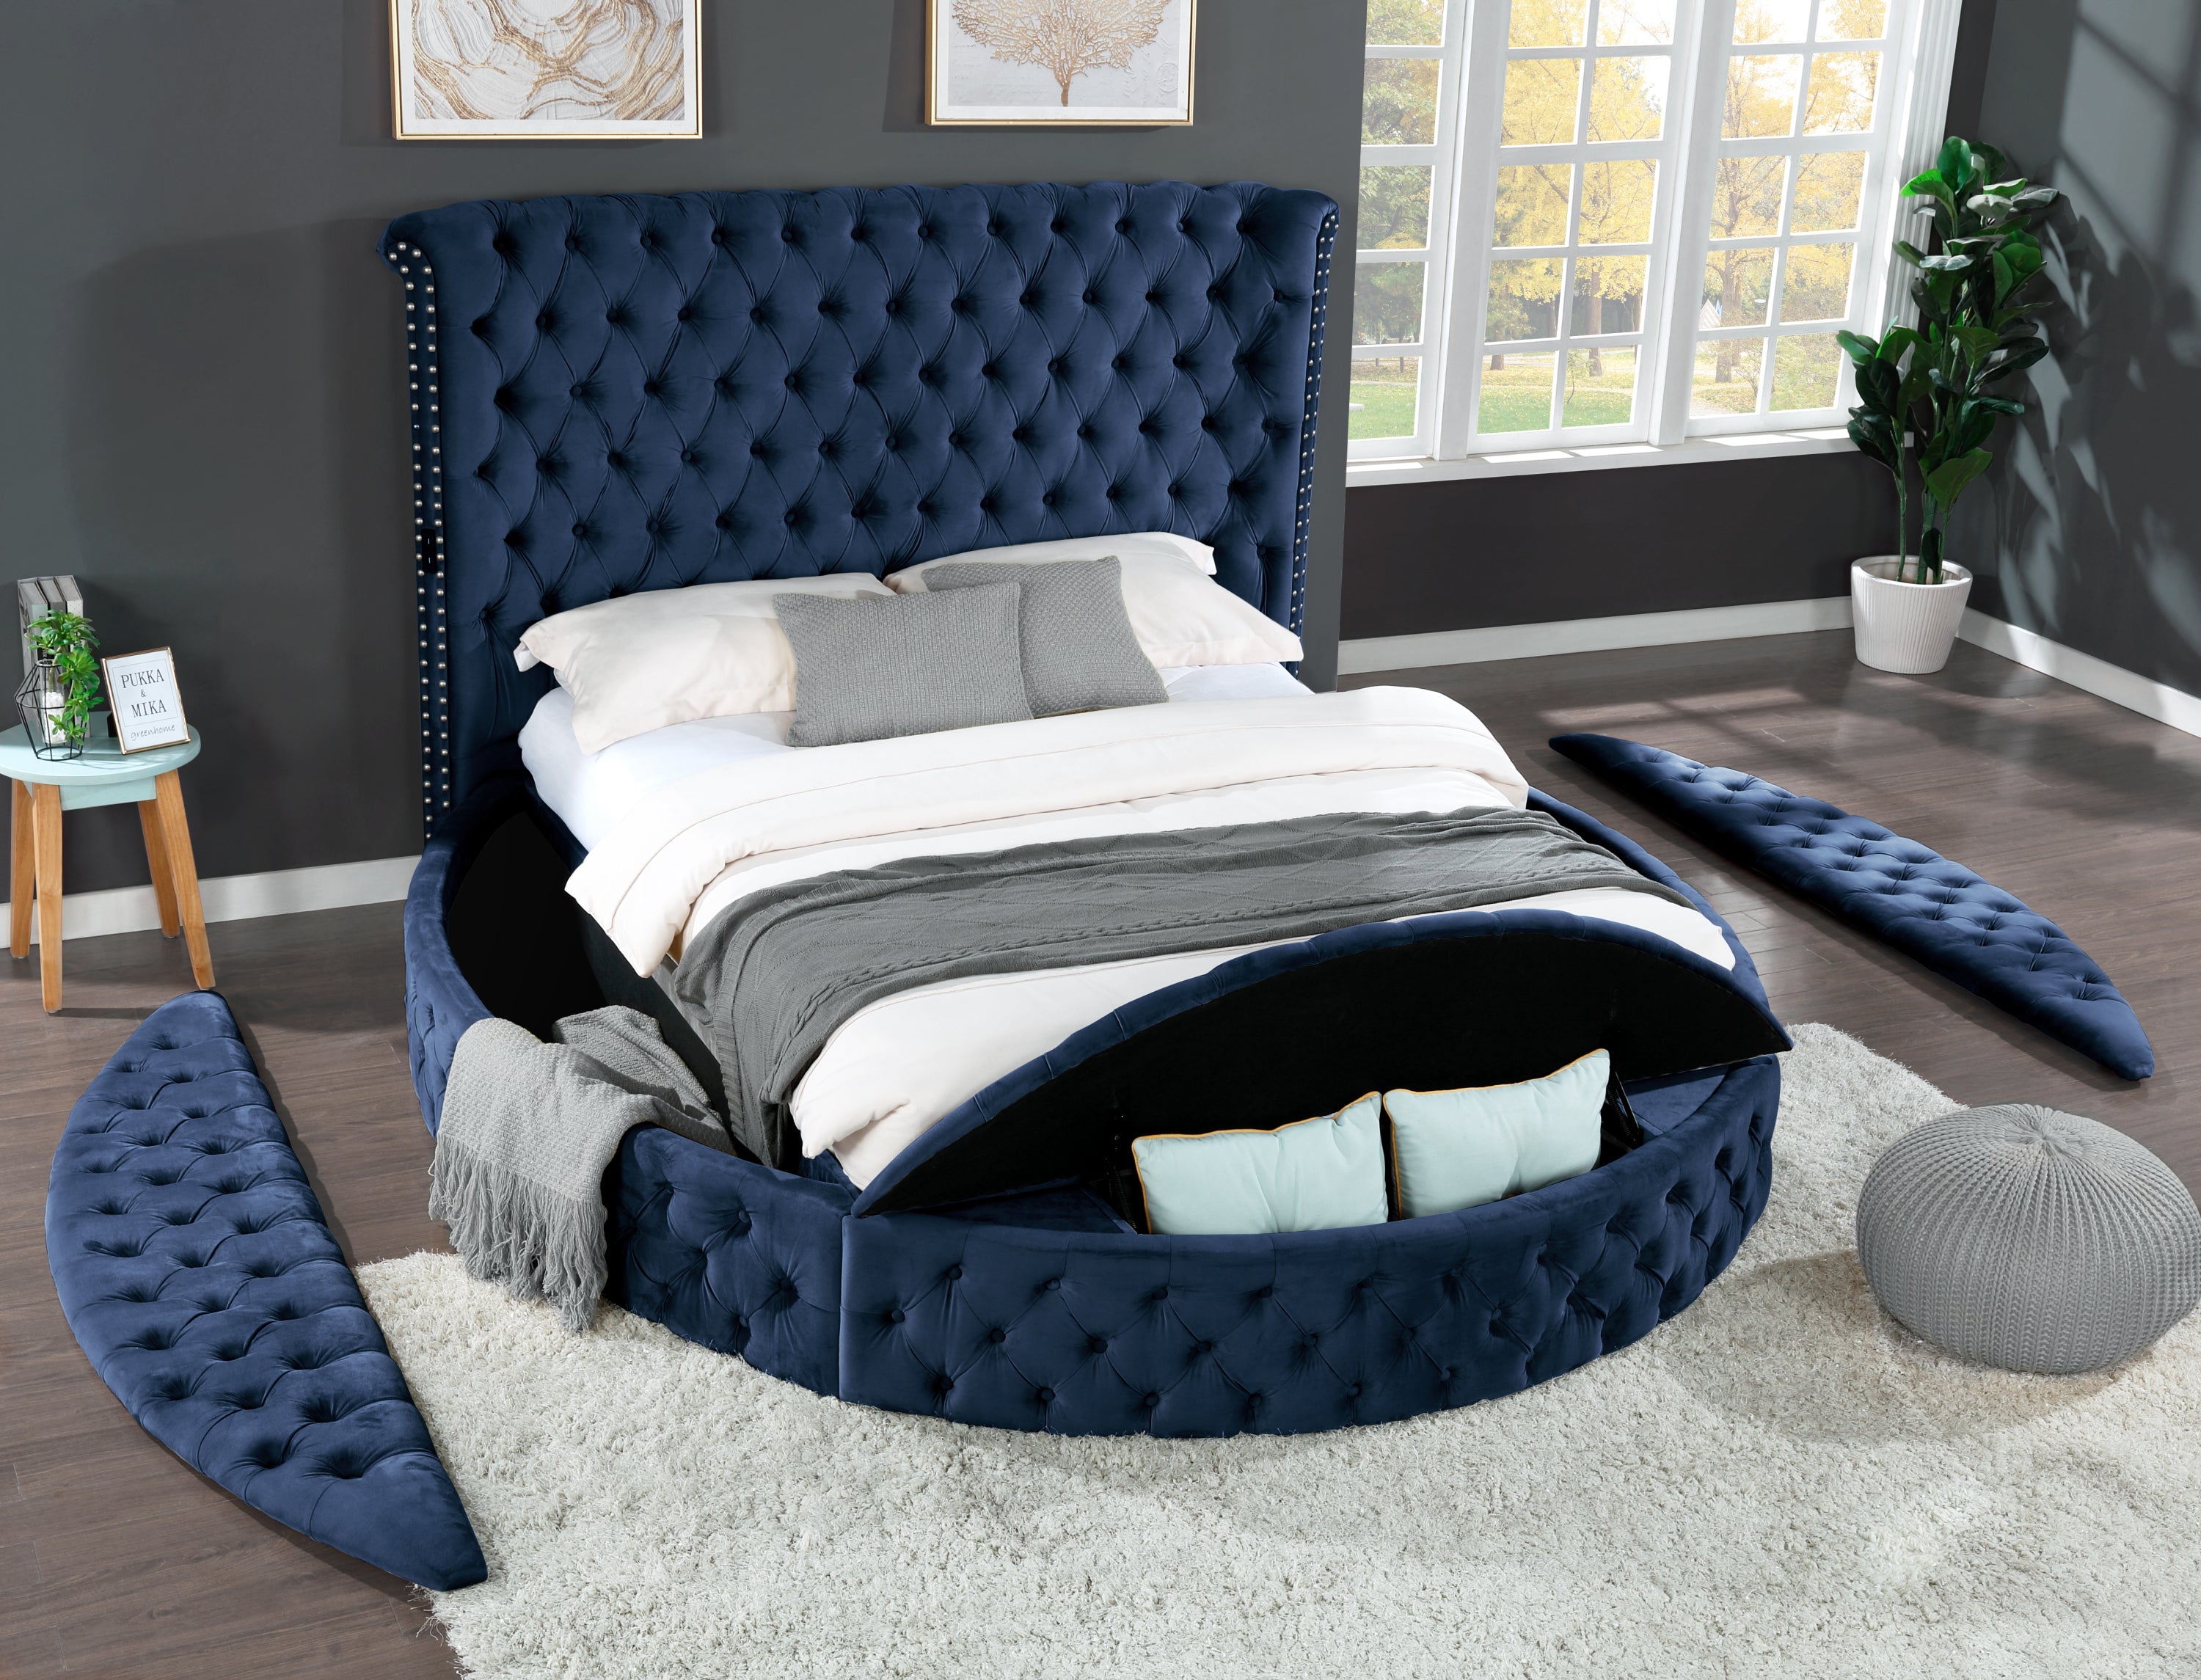 Hazel Queen Size Tufted Storage Bed made with Wood - Blue